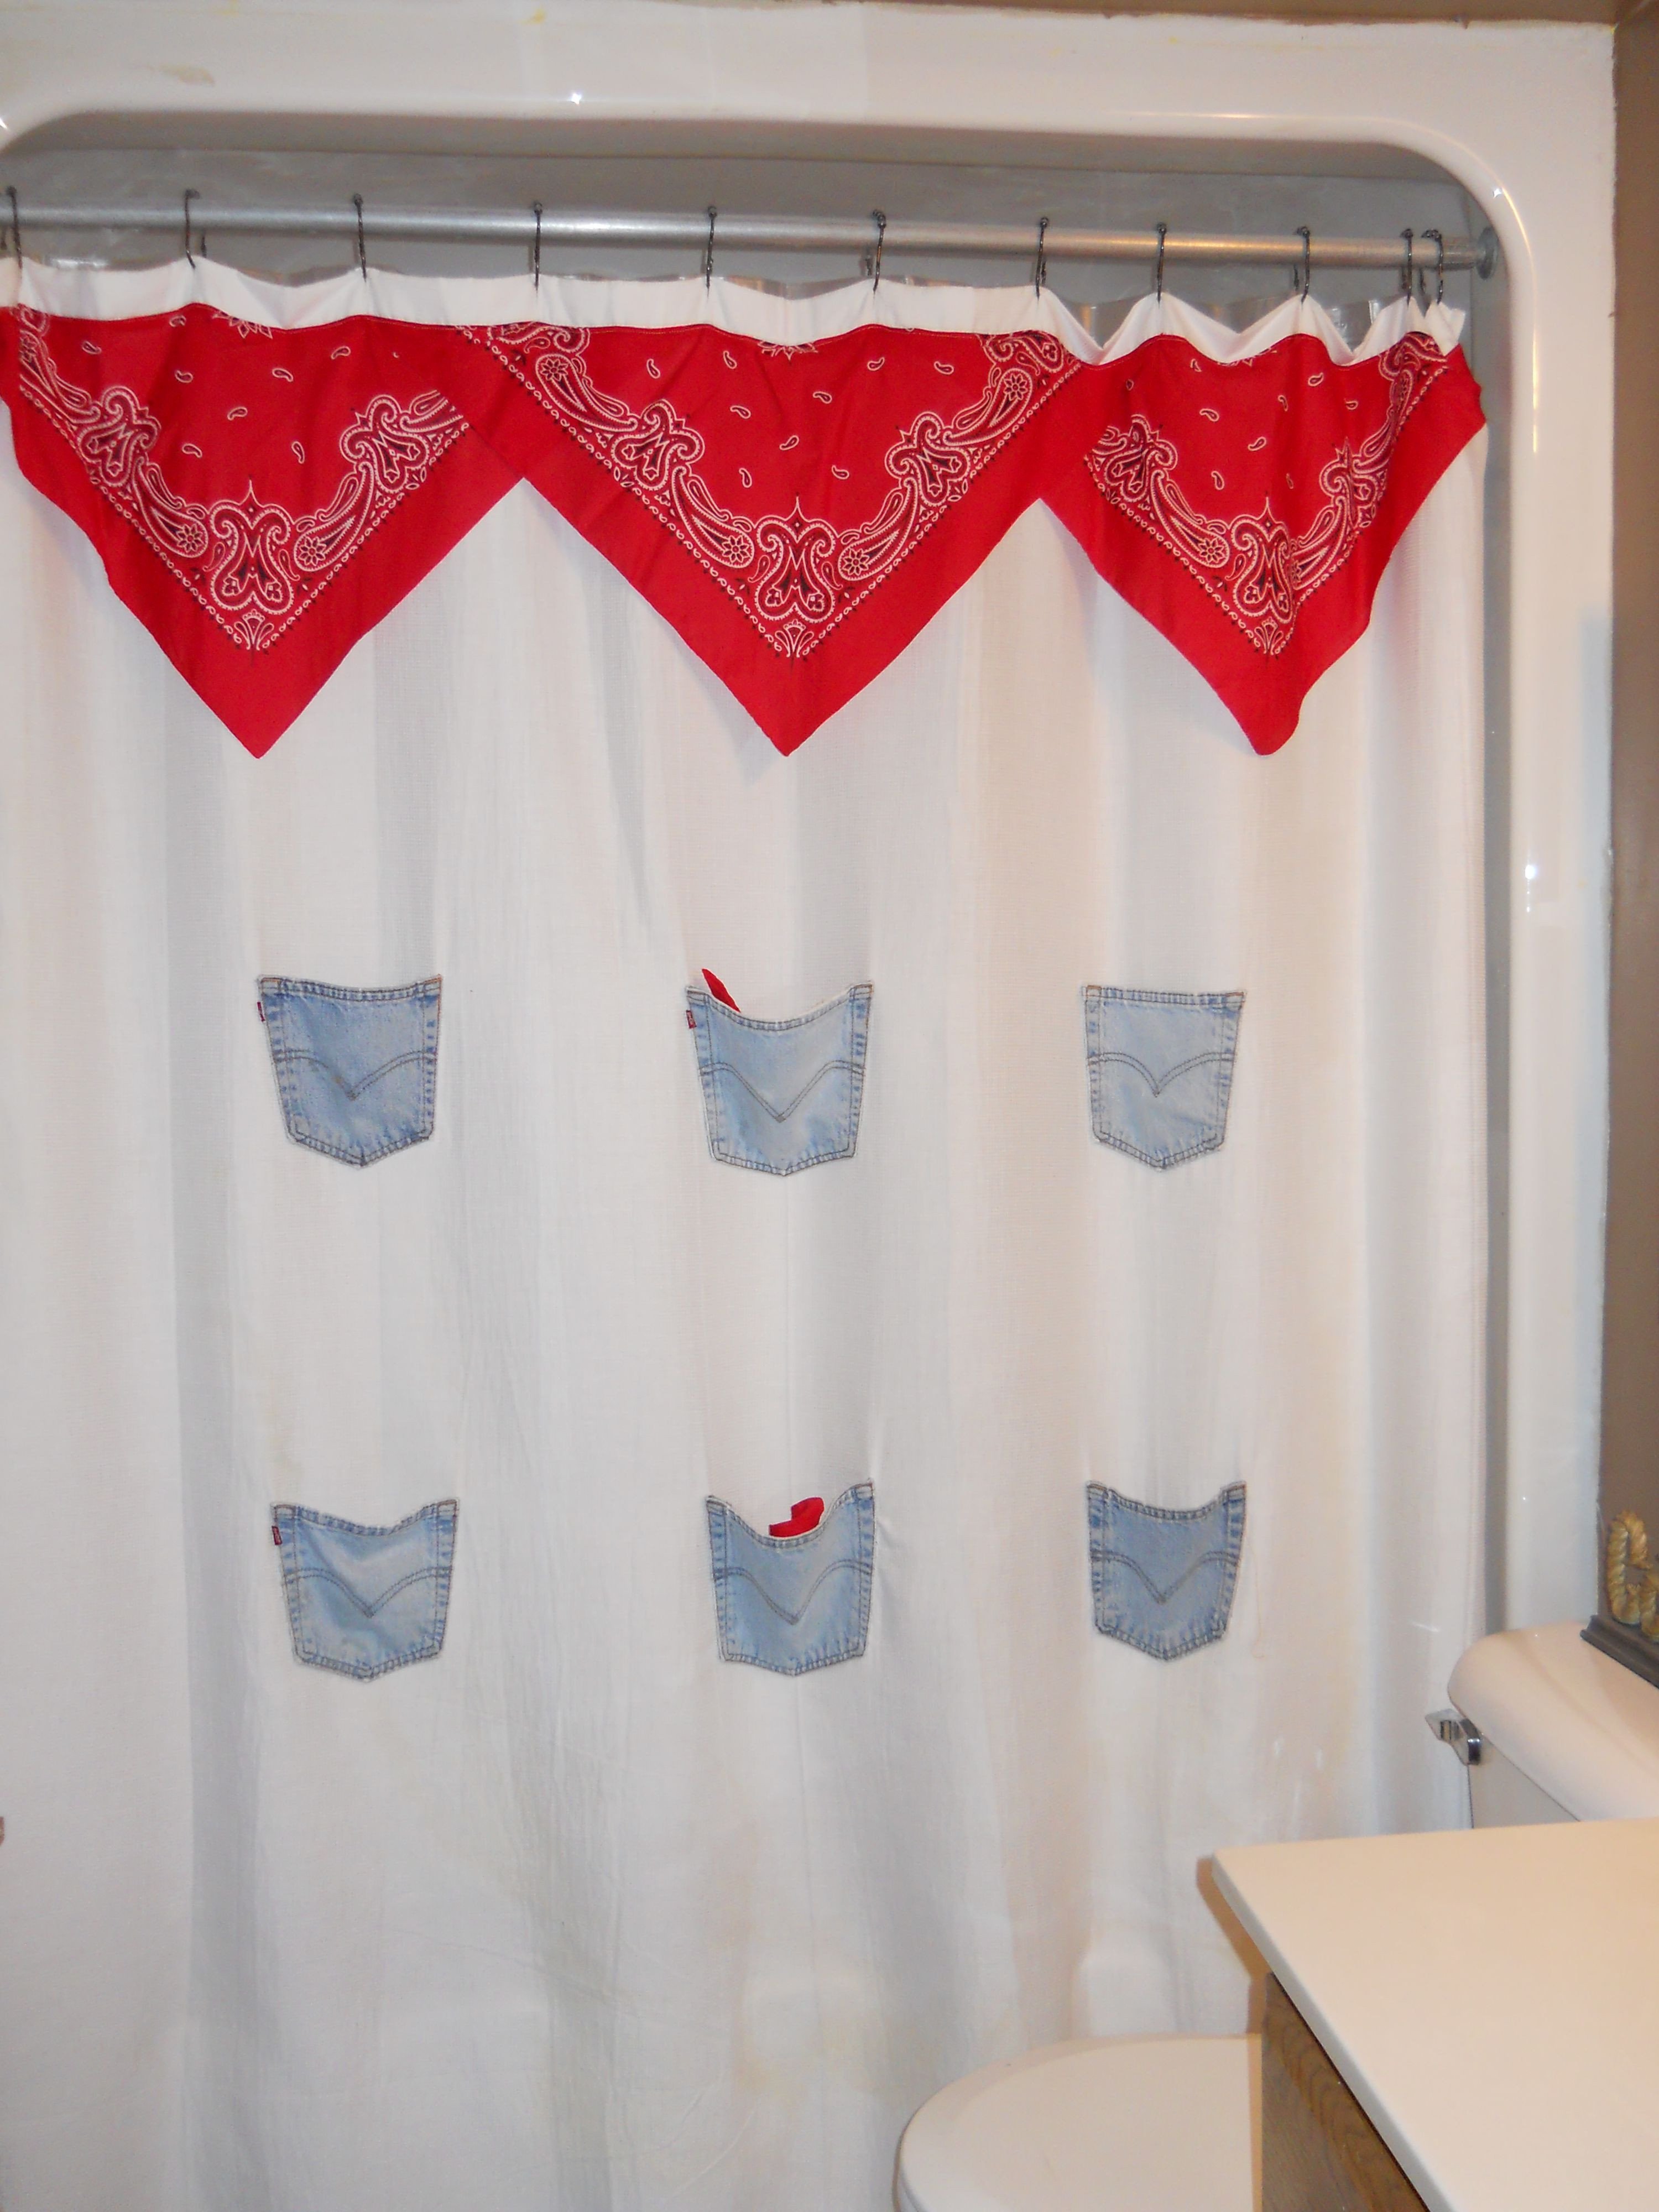 Western Curtains for Bedroom Inspirational Shower Curtain for Cowgirl Bathroom Using A Plain White